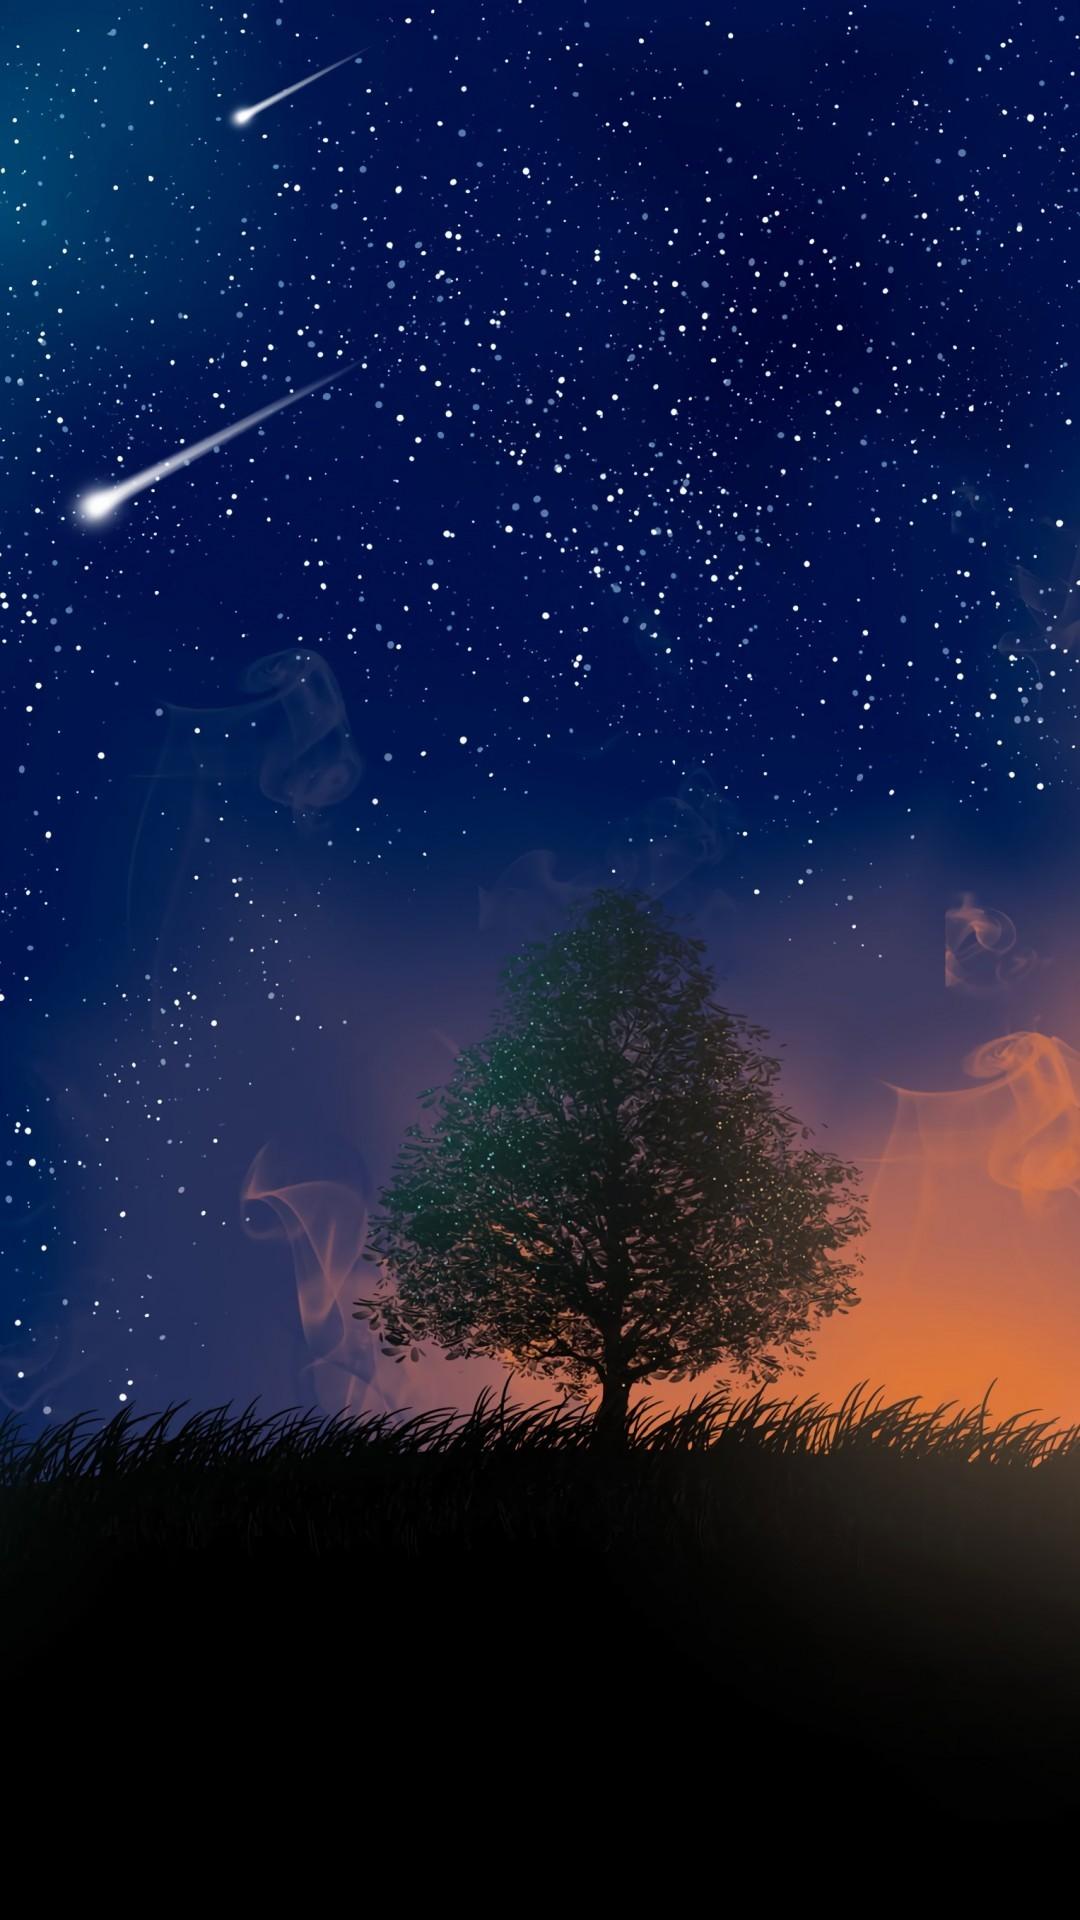 Download 1080x1920 Falling Stars, Lonely Tree Wallpaper for iPhone